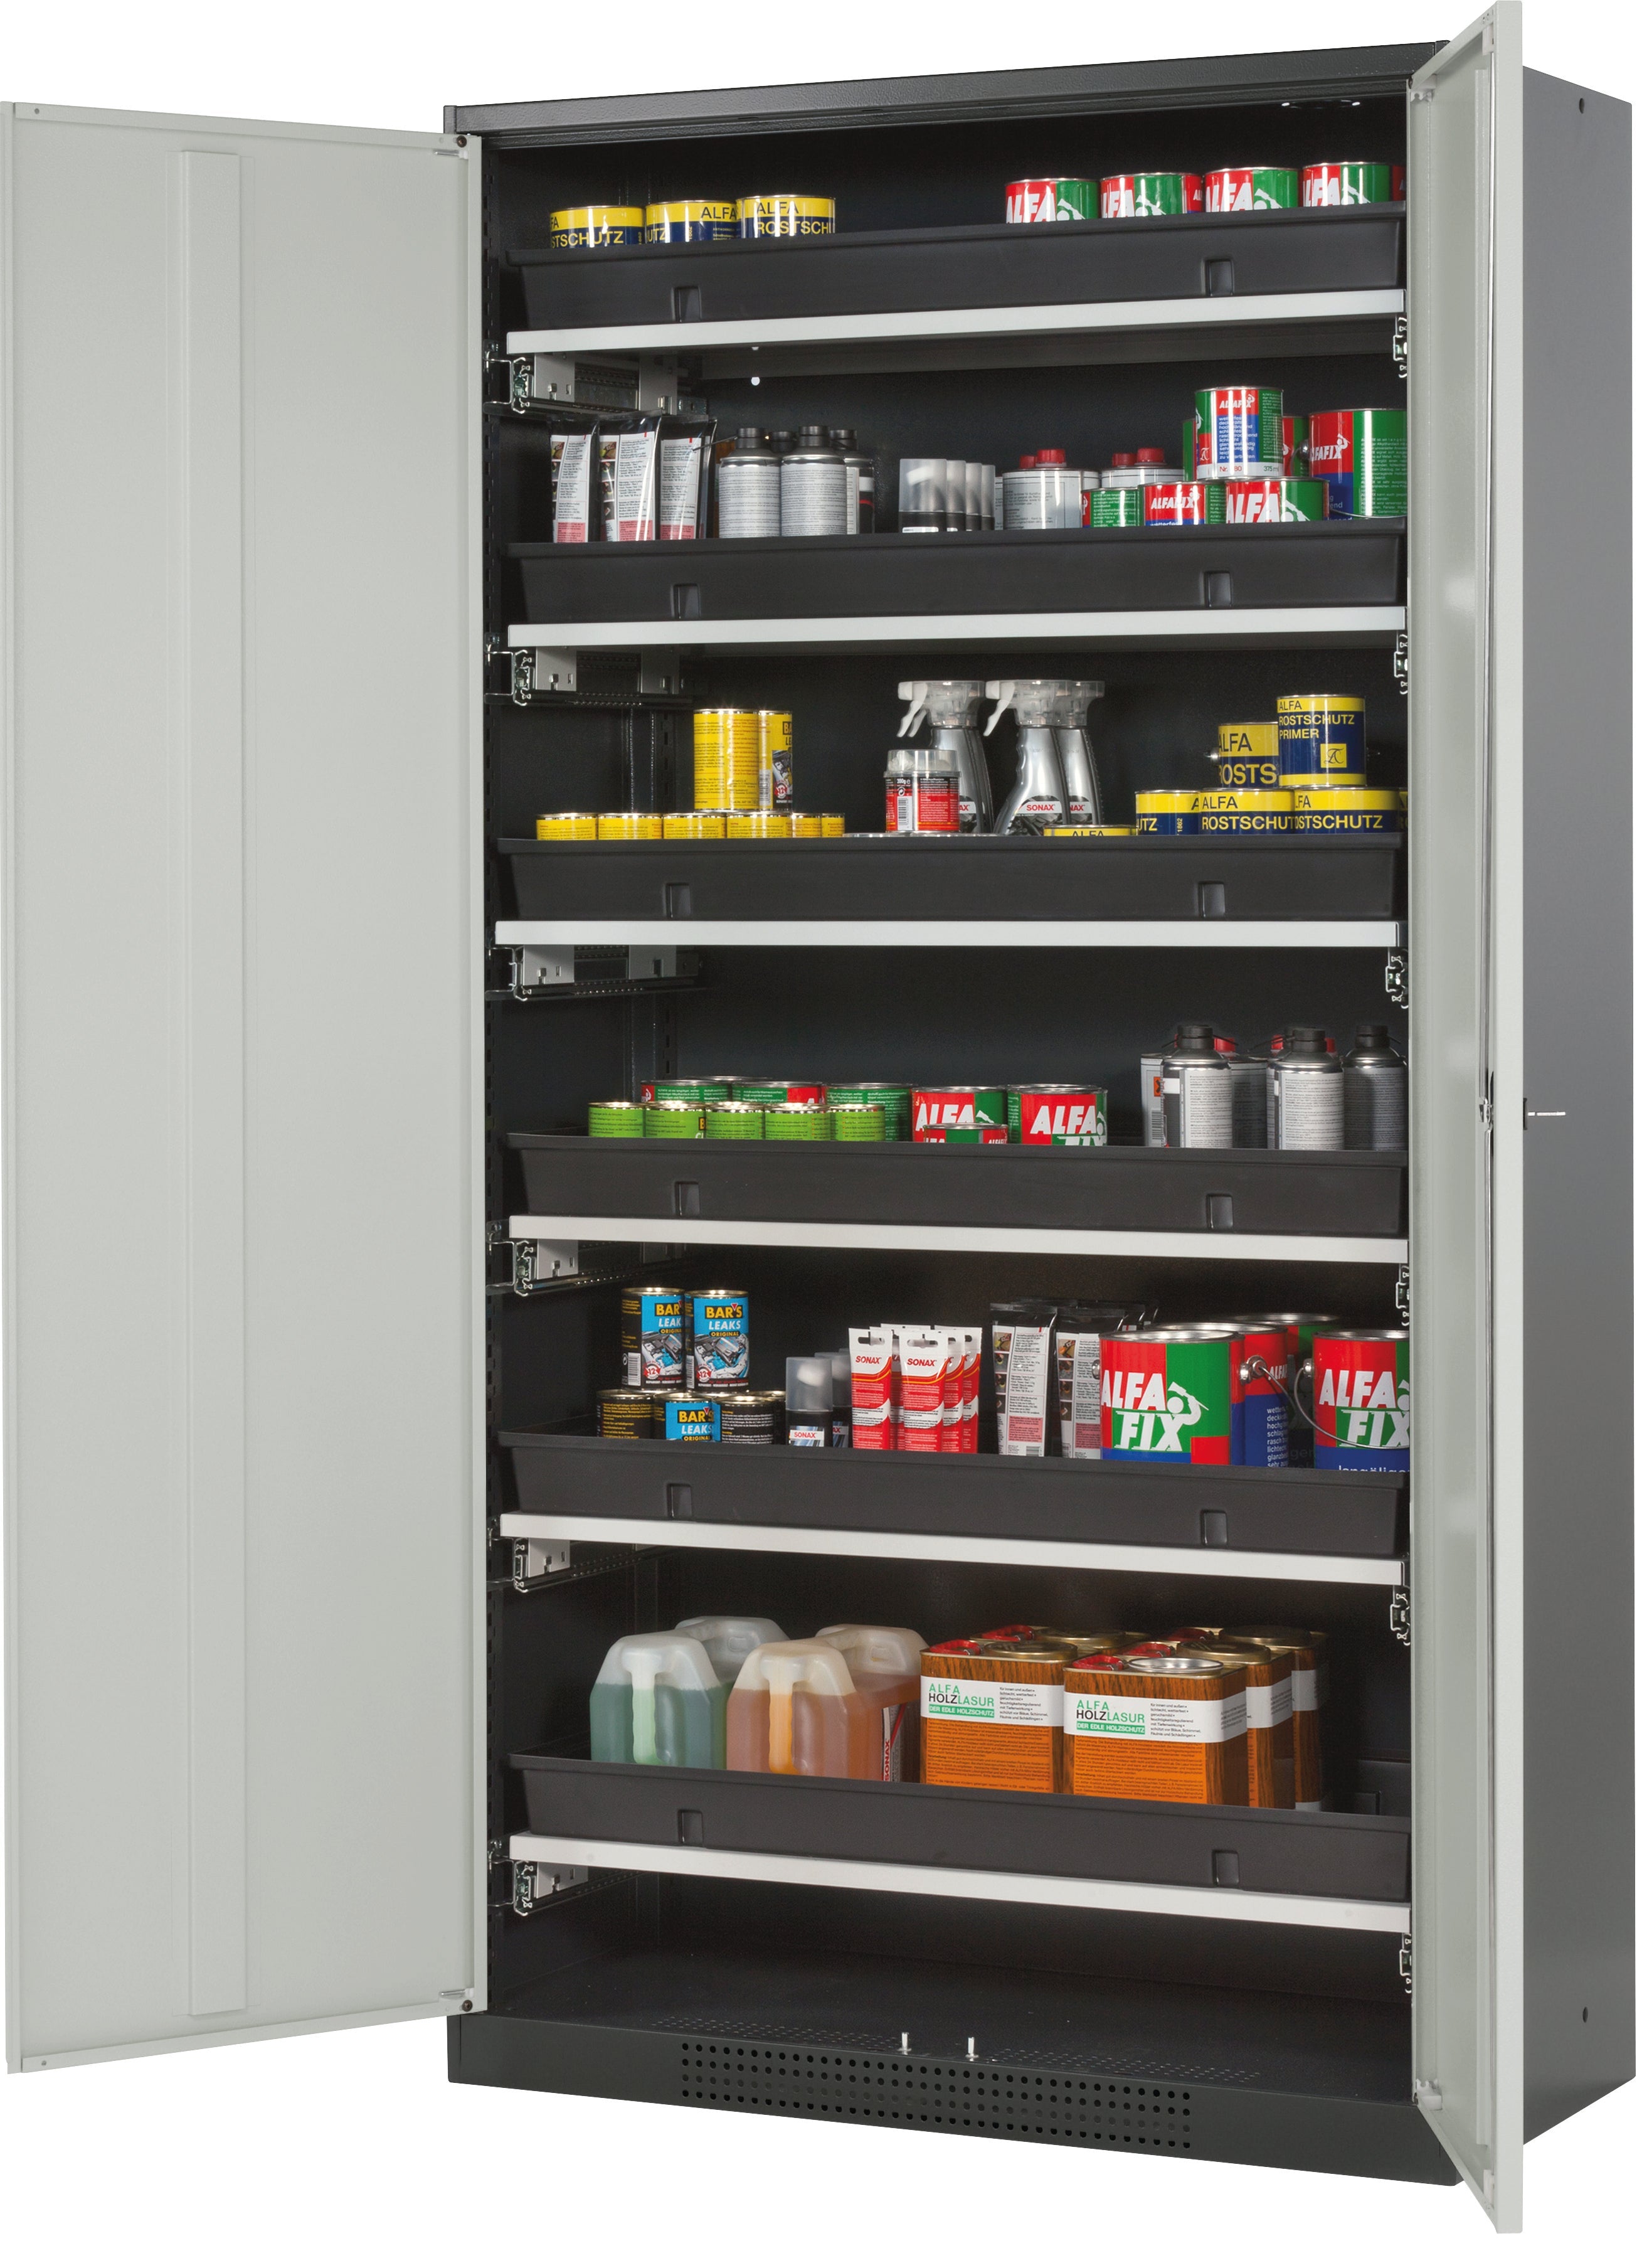 Chemical cabinet CS-CLASSIC model CS.195.105 in light gray RAL 7035 with 6x AbZ pull-out shelves (sheet steel/polypropylene)